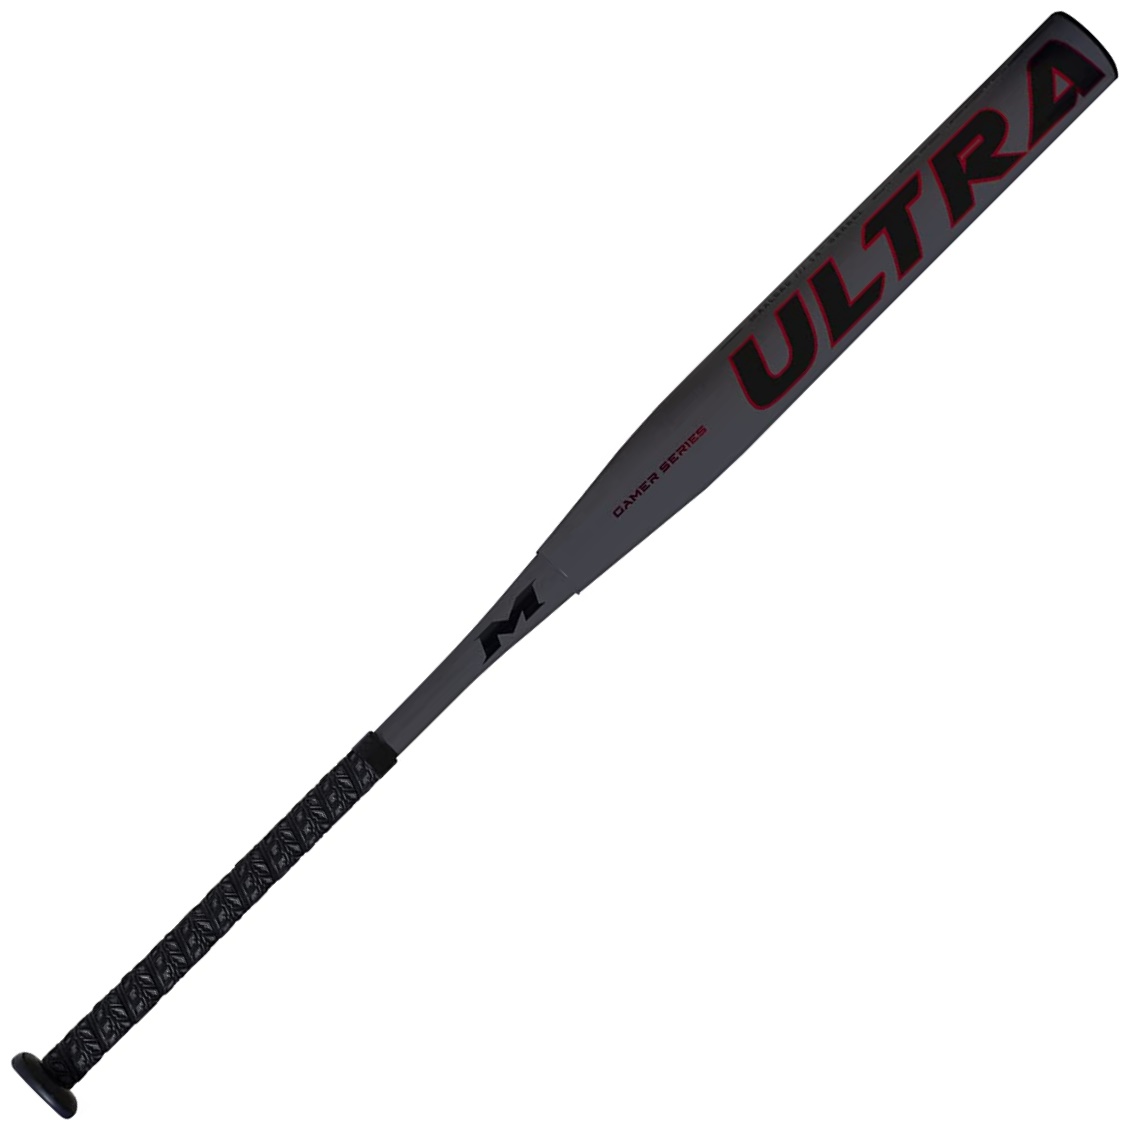 miken-ultra-gamer-series-two-piece-maxload-14-barrel-ssusa-slowpitch-softball-bat-34-inch-28-oz MUL21S-3-28   The New Miken Ultra Gamer Series offers one of the largest